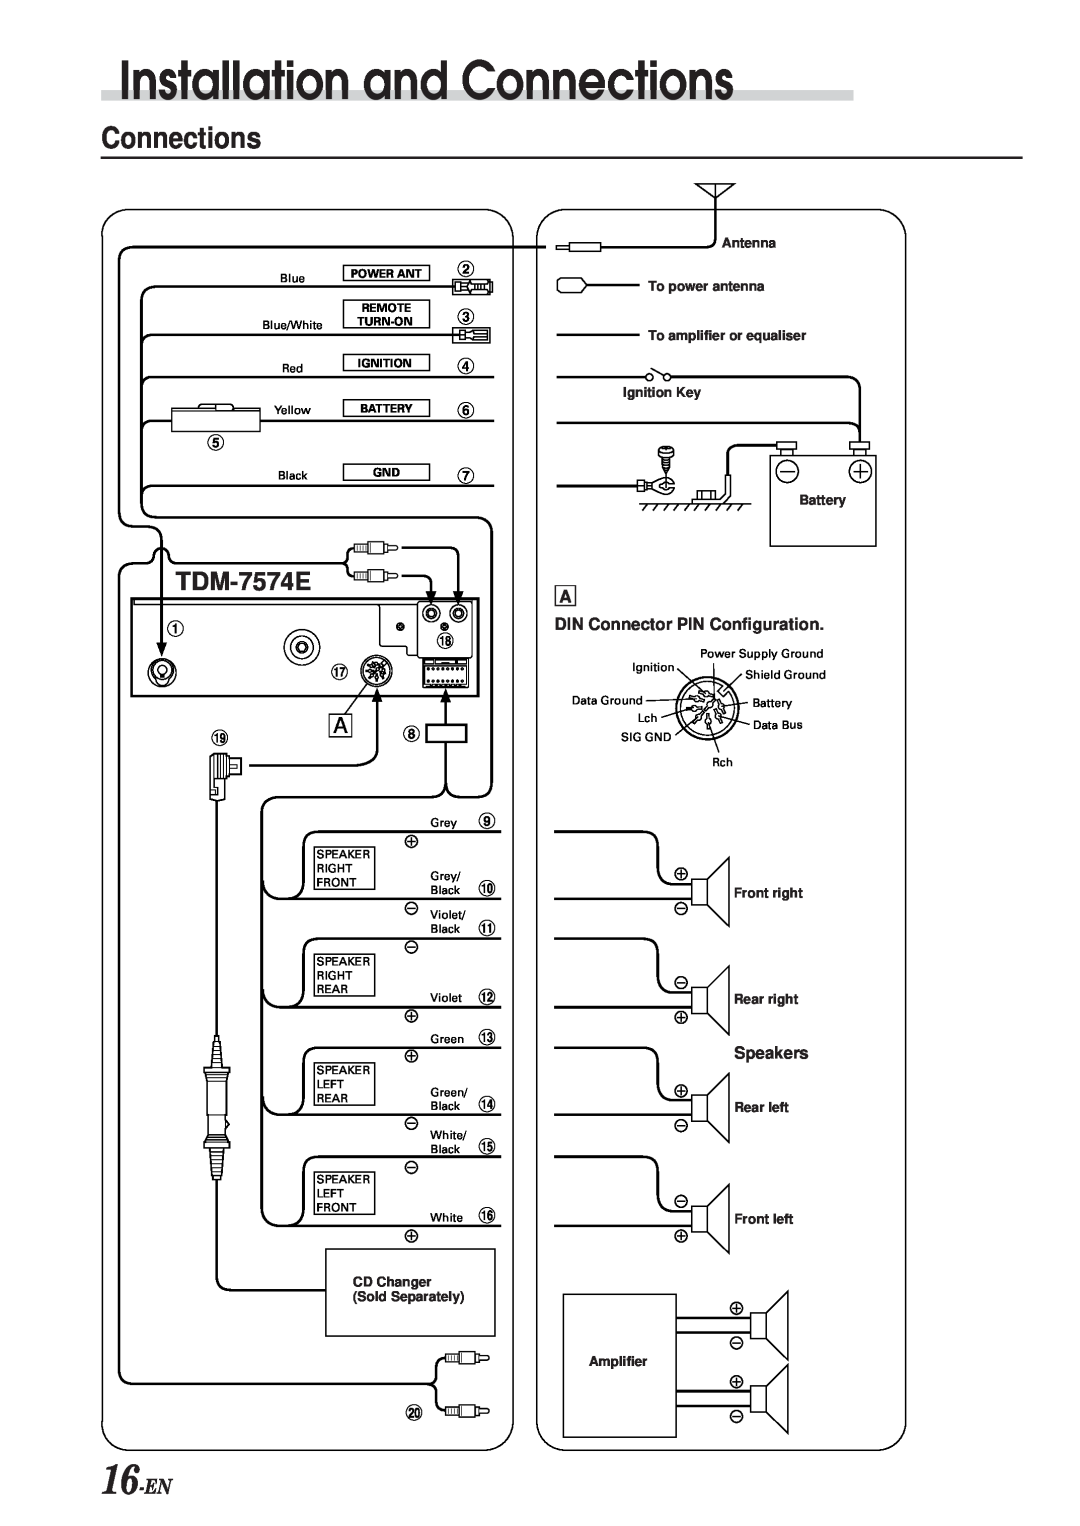 Alpine TDM-7574E owner manual 16-EN, Installation and Connections, DIN Connector PIN Configuration, Speakers 